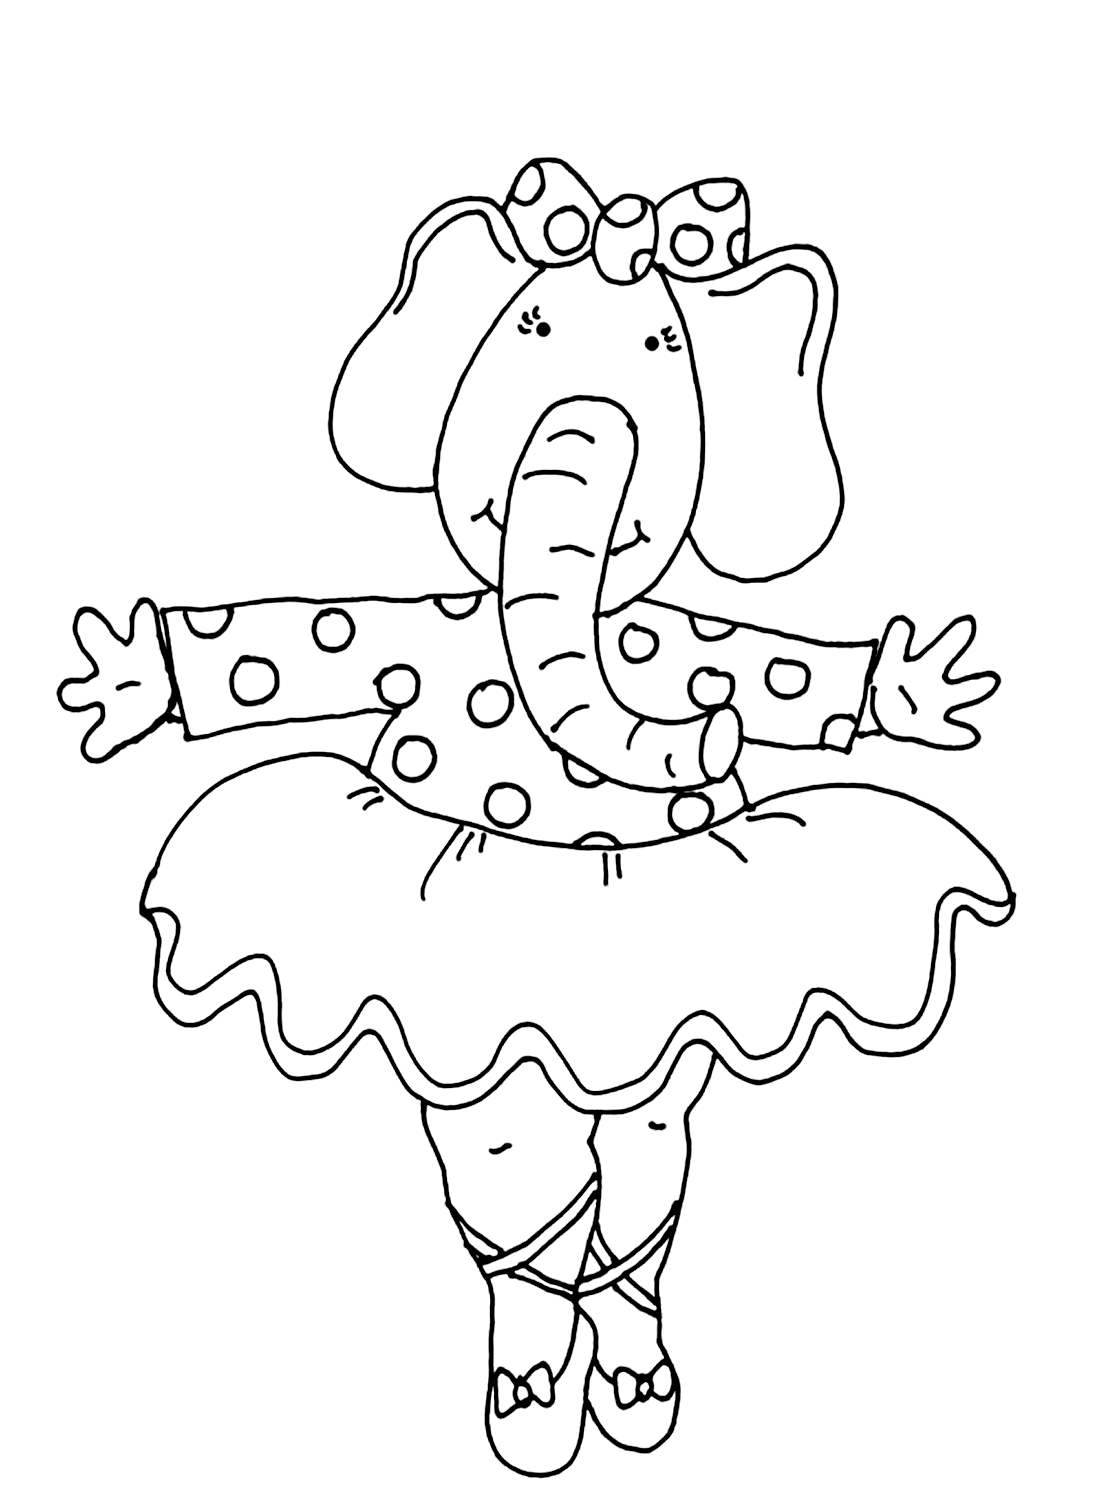 Elephant Loves Dancing Coloring Page